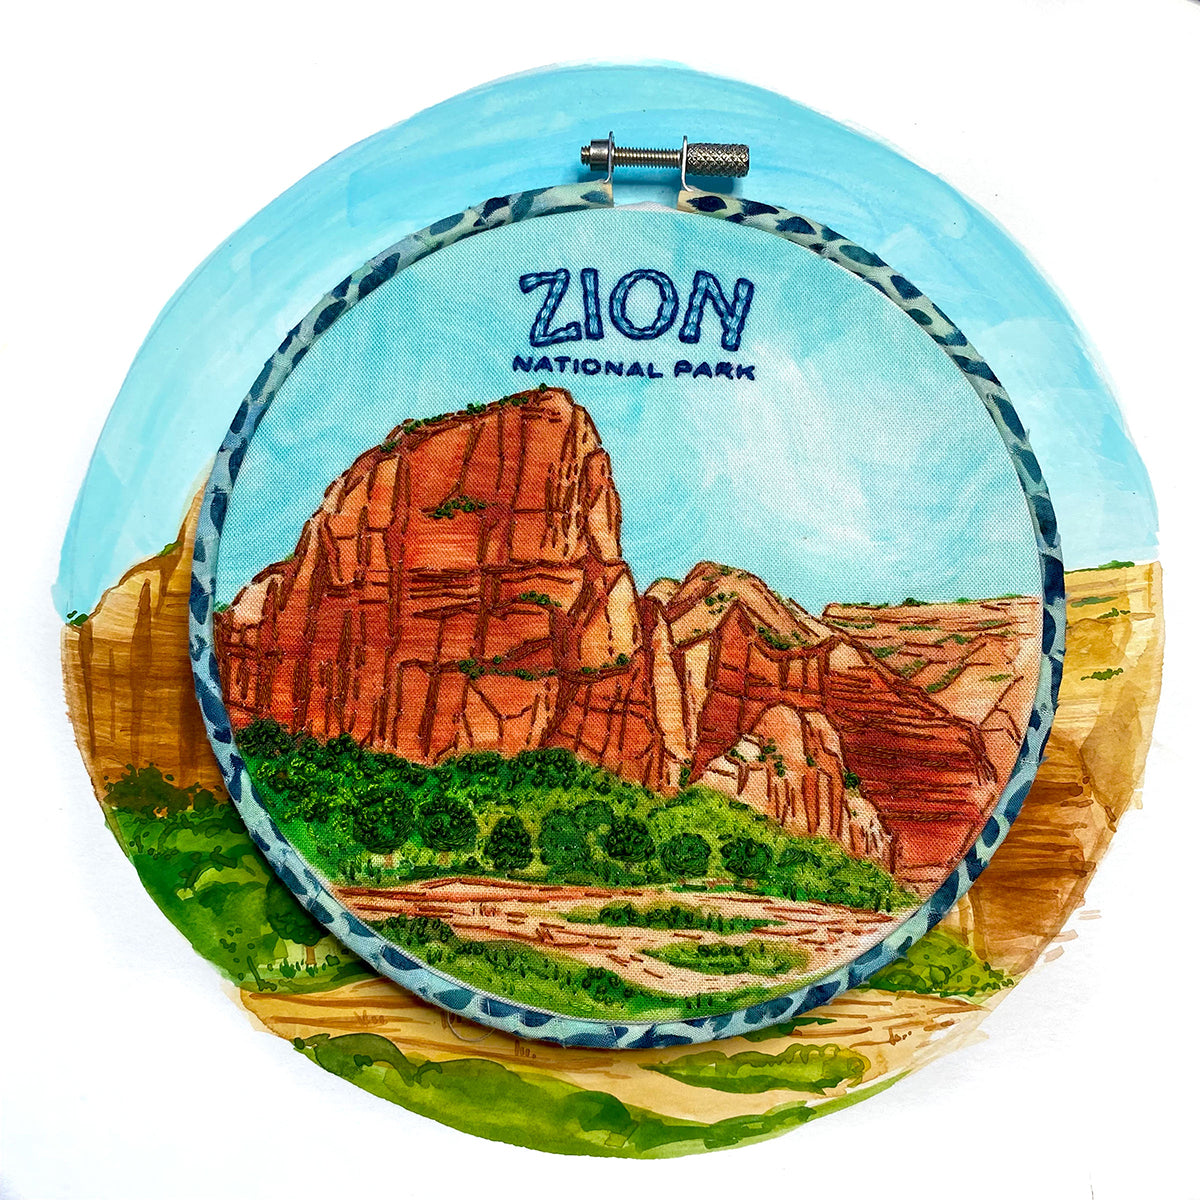 Zion National Park Embroidery Kit in a hoop sitting on top of an illustration of Zion Angels Rest